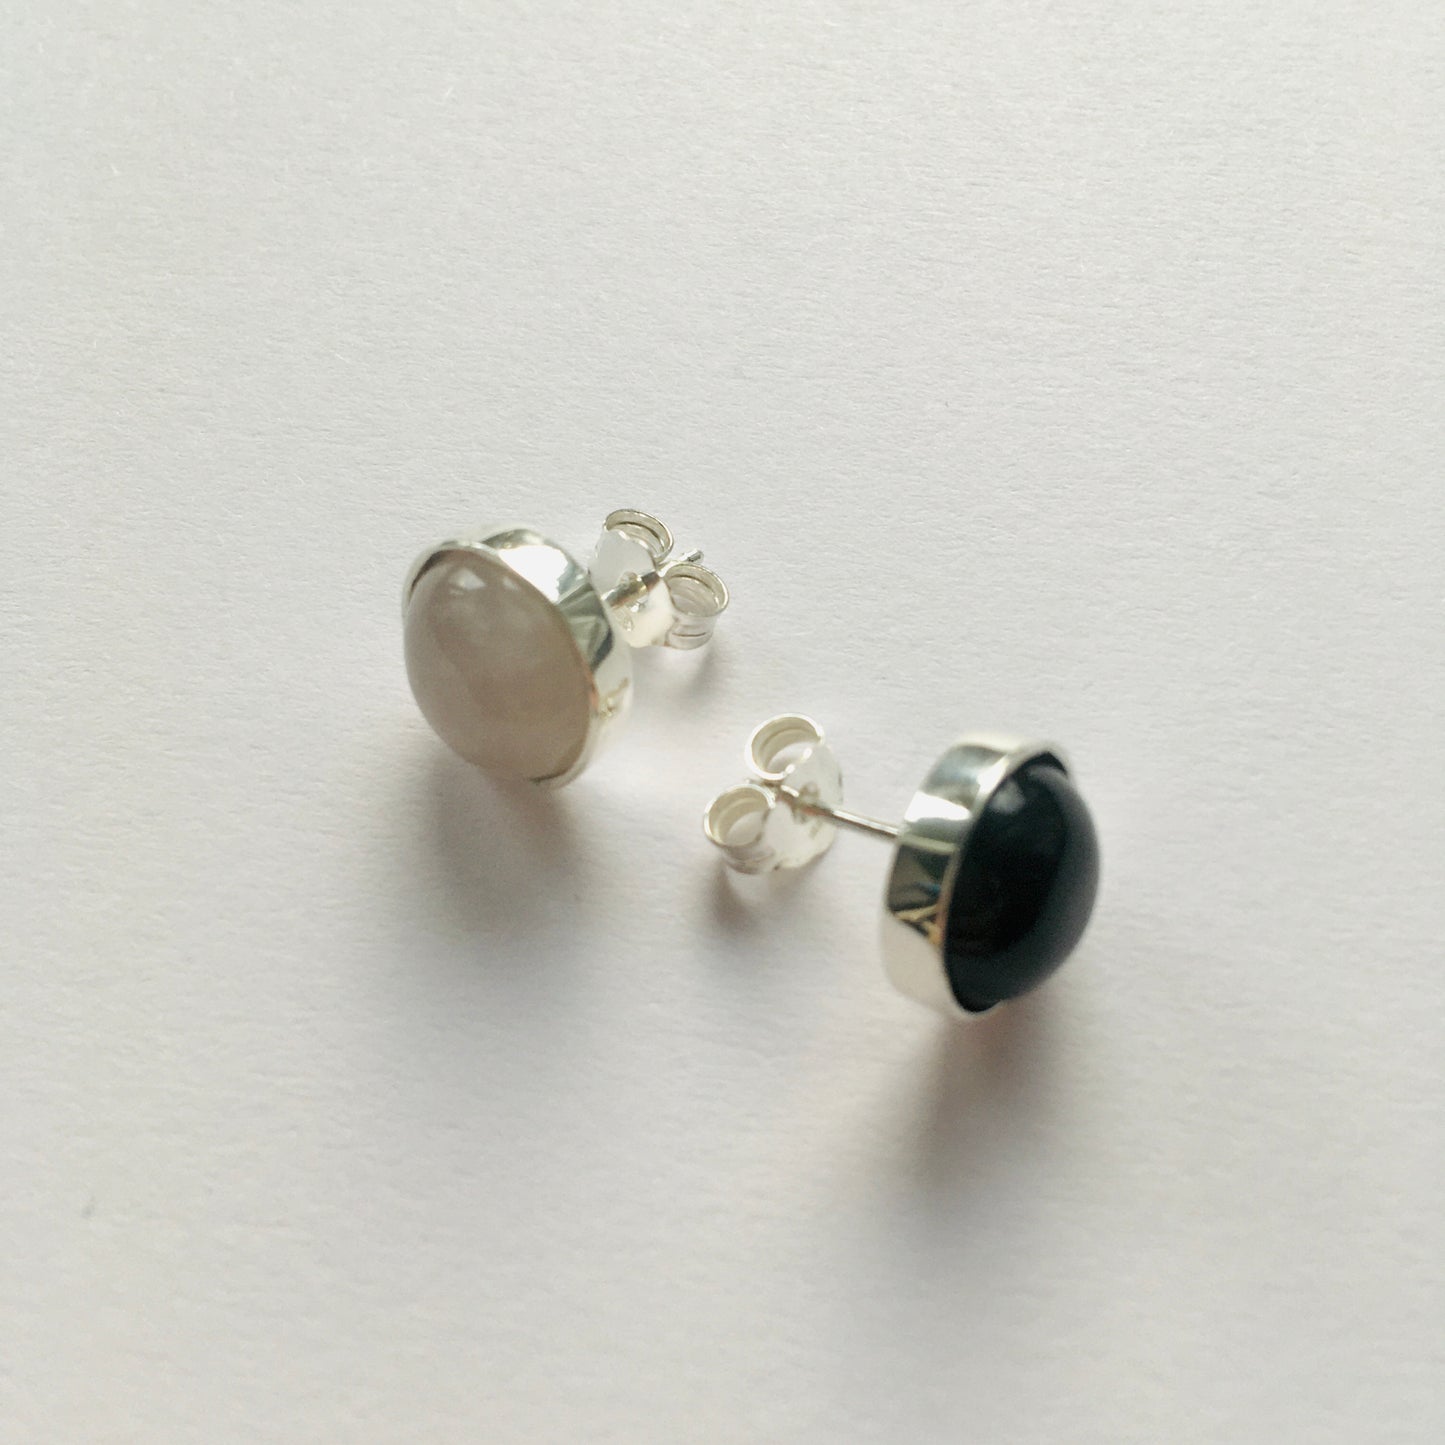 Pop. Ear studs with rose quartz and onyx